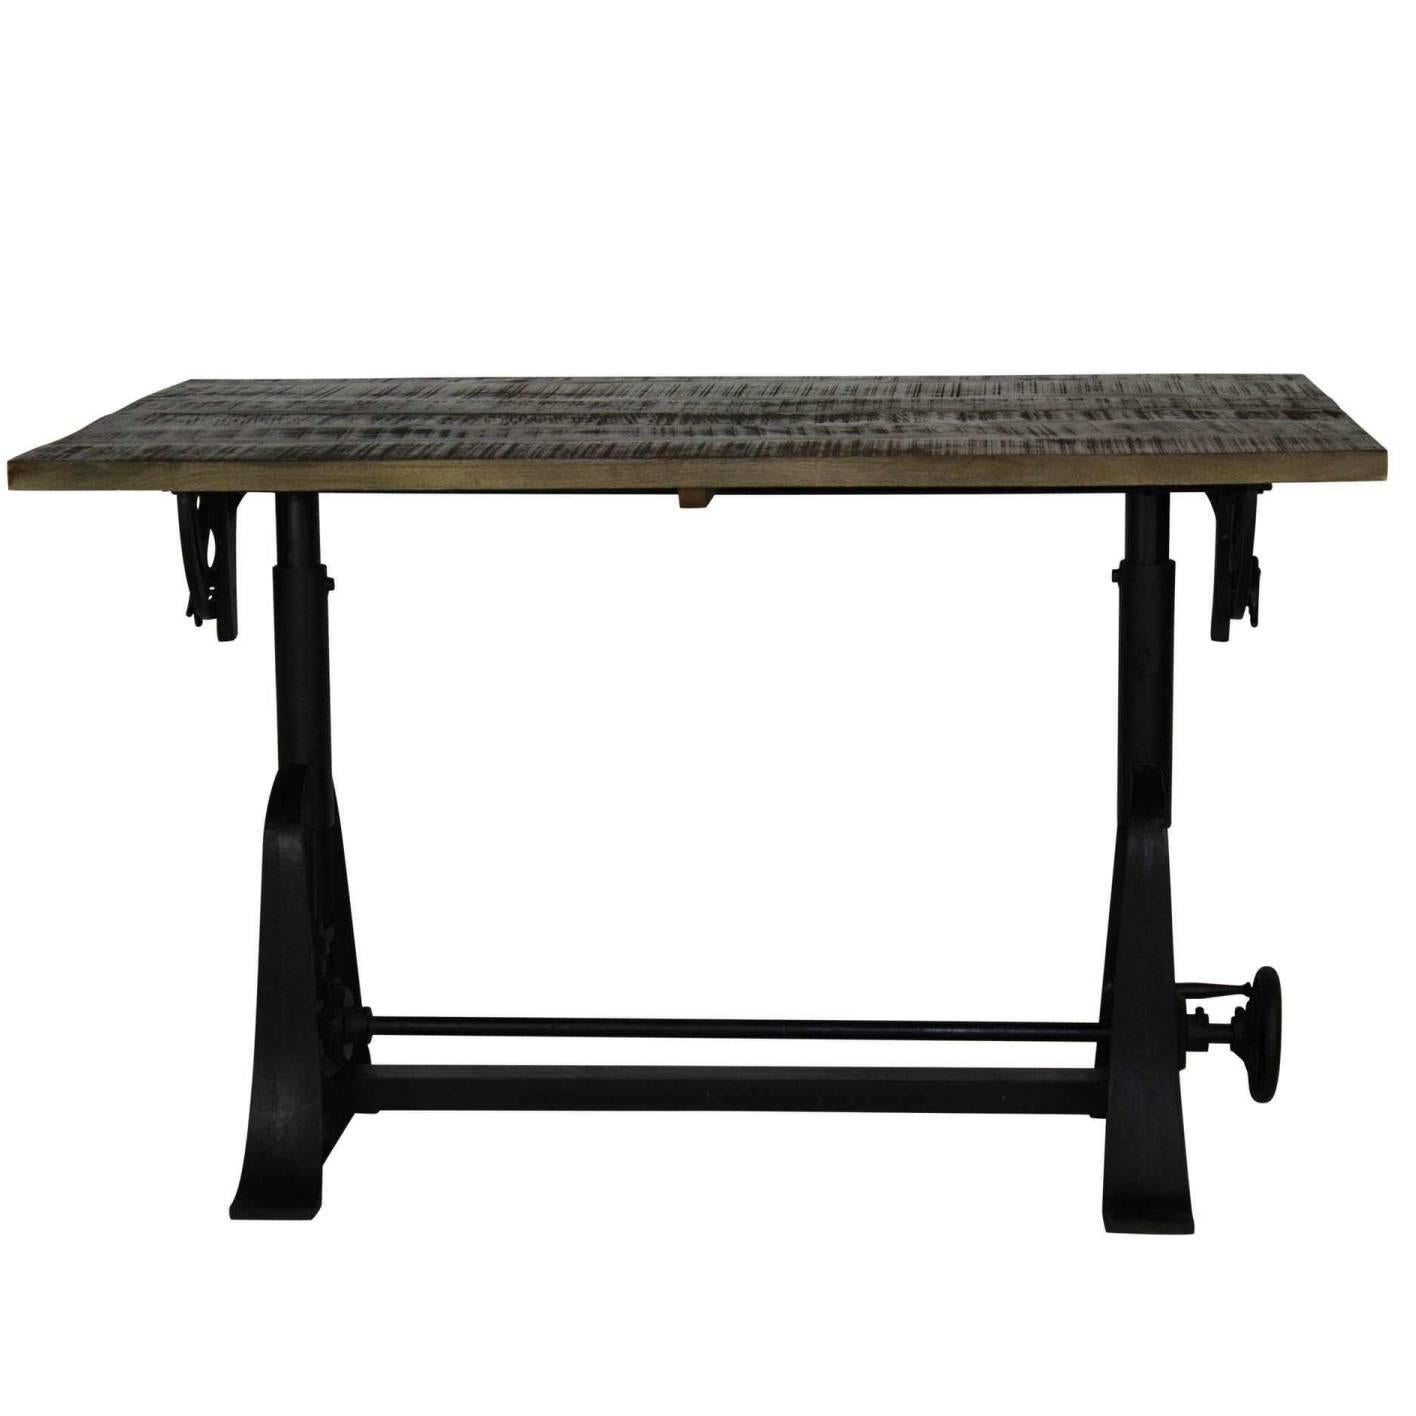 Industrial Style Drafting Table with Adjustable Height and Tilt